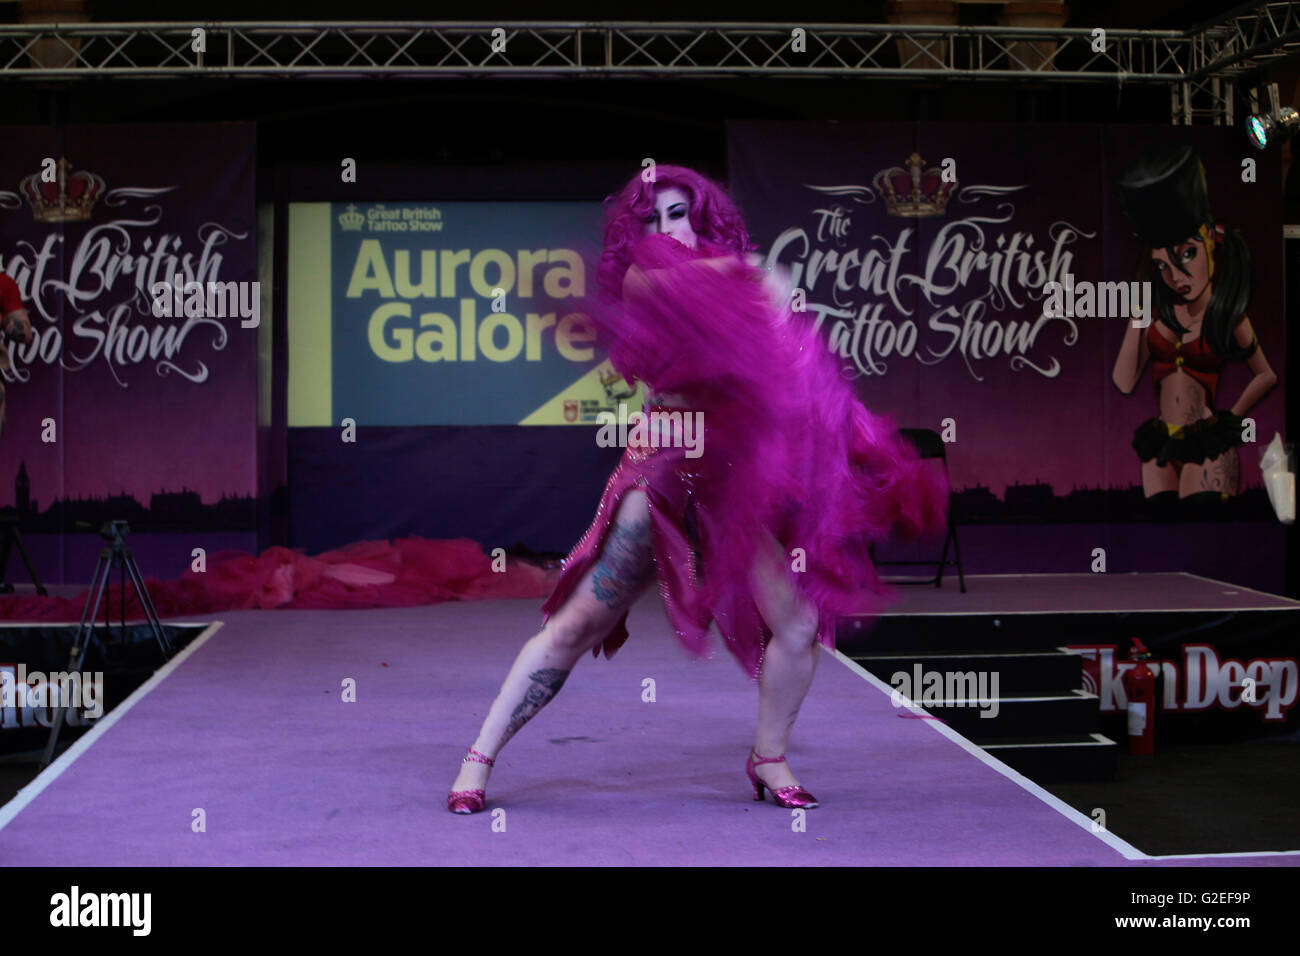 London UK ,29.May.2016.Alexandra Palace welcomed Aurora Galore  currently voted  No 7th Top Burlesque performer in the world via 21st Century Burlesque, as well as winning the title of Most Innovative performer at the Burlesque Hall of Fame in Las Vegas 2014,showing her stuff at the Great British Tattoo show 2016 ,Alexandra palace @Paul Quezada-Neiman/Alamy Live News Stock Photo